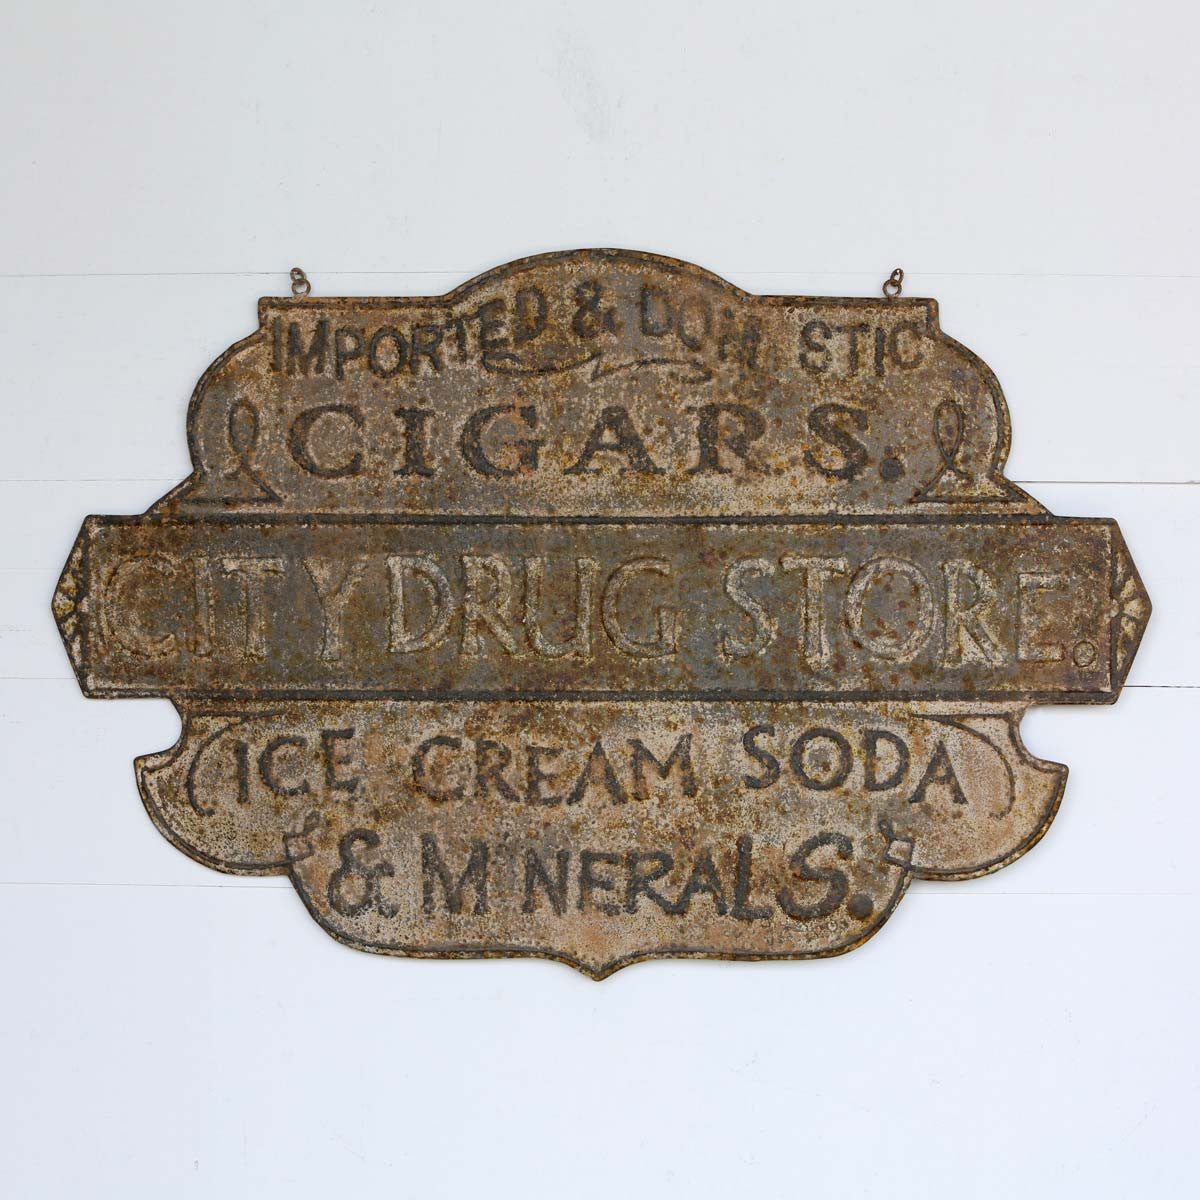 Old Time Drugstore Sign